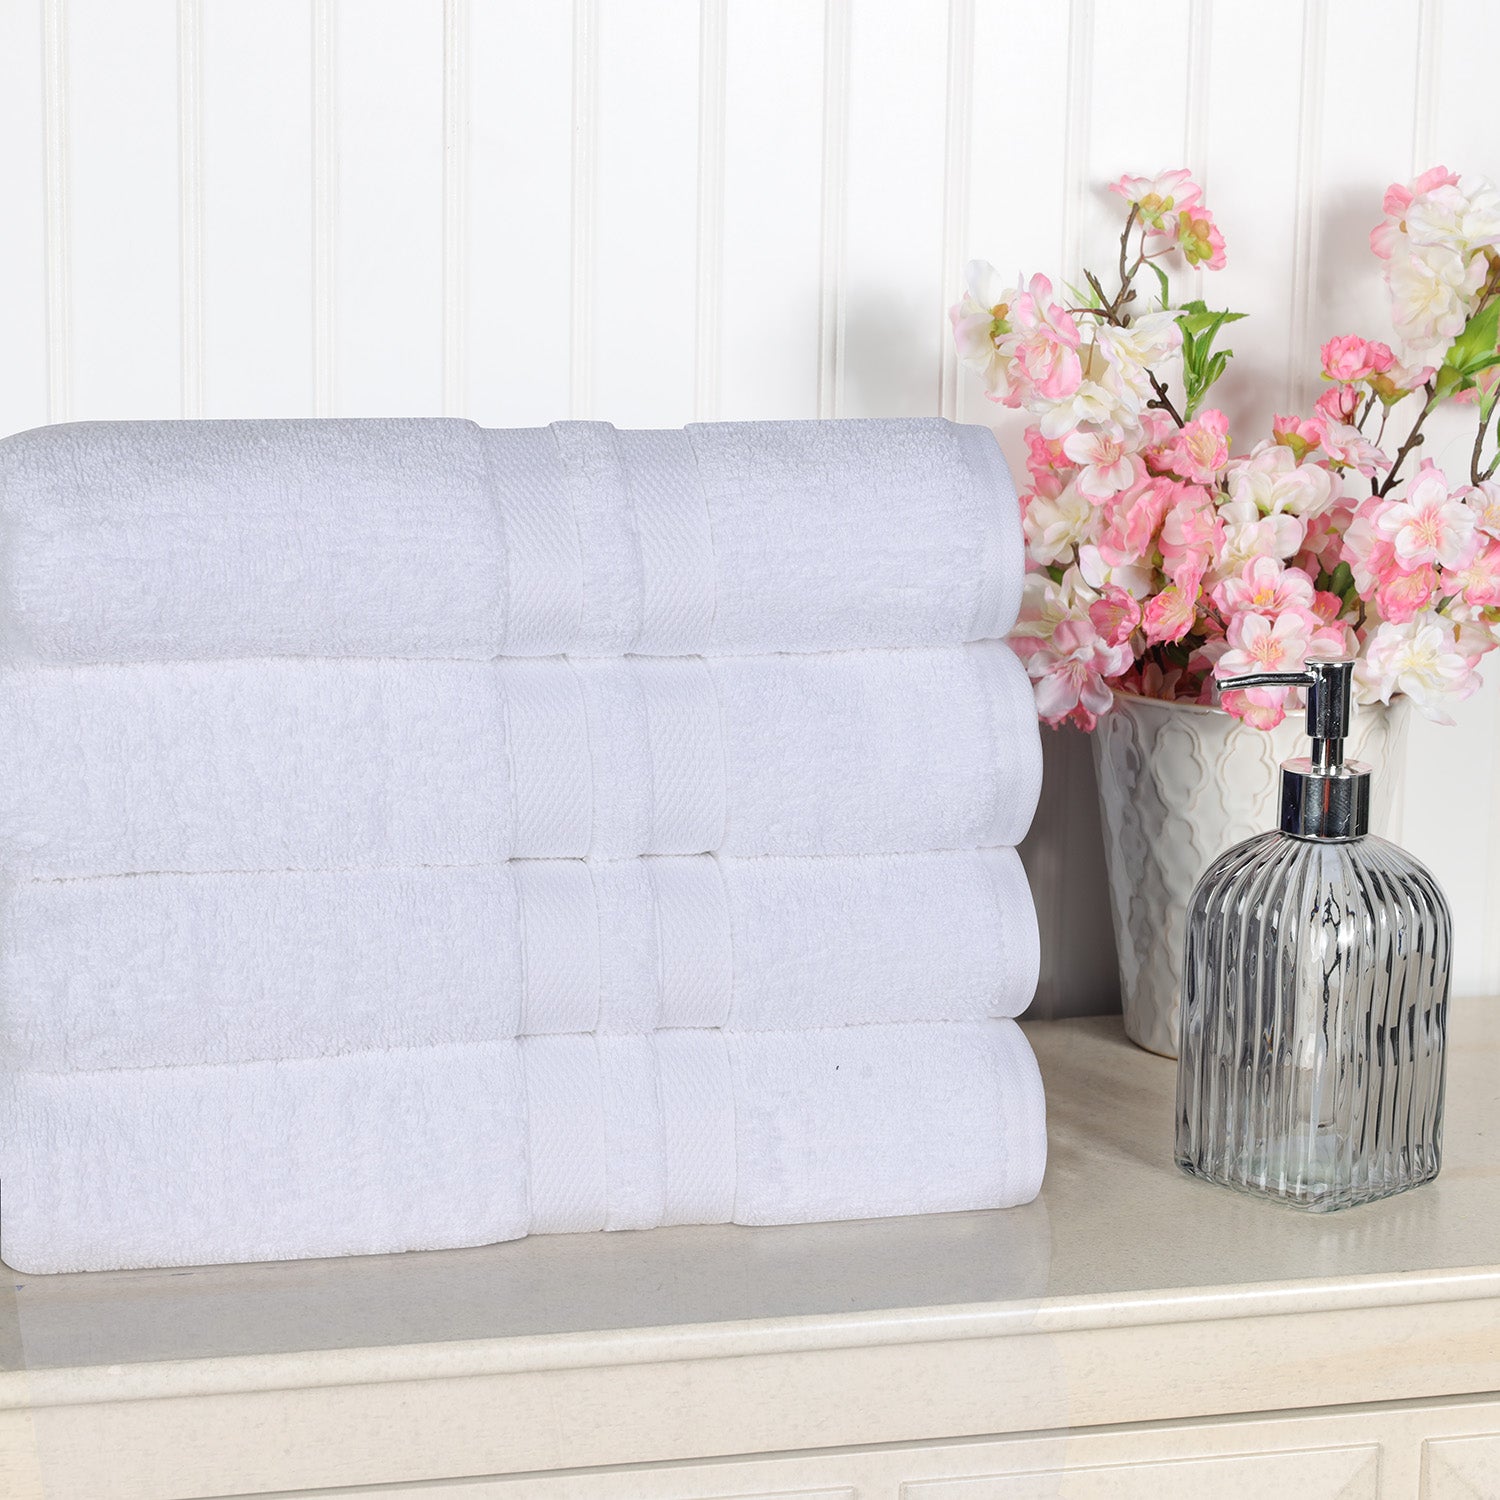 Superior Ultra Soft Cotton Absorbent Solid Bath Towel (Set of 4) - White